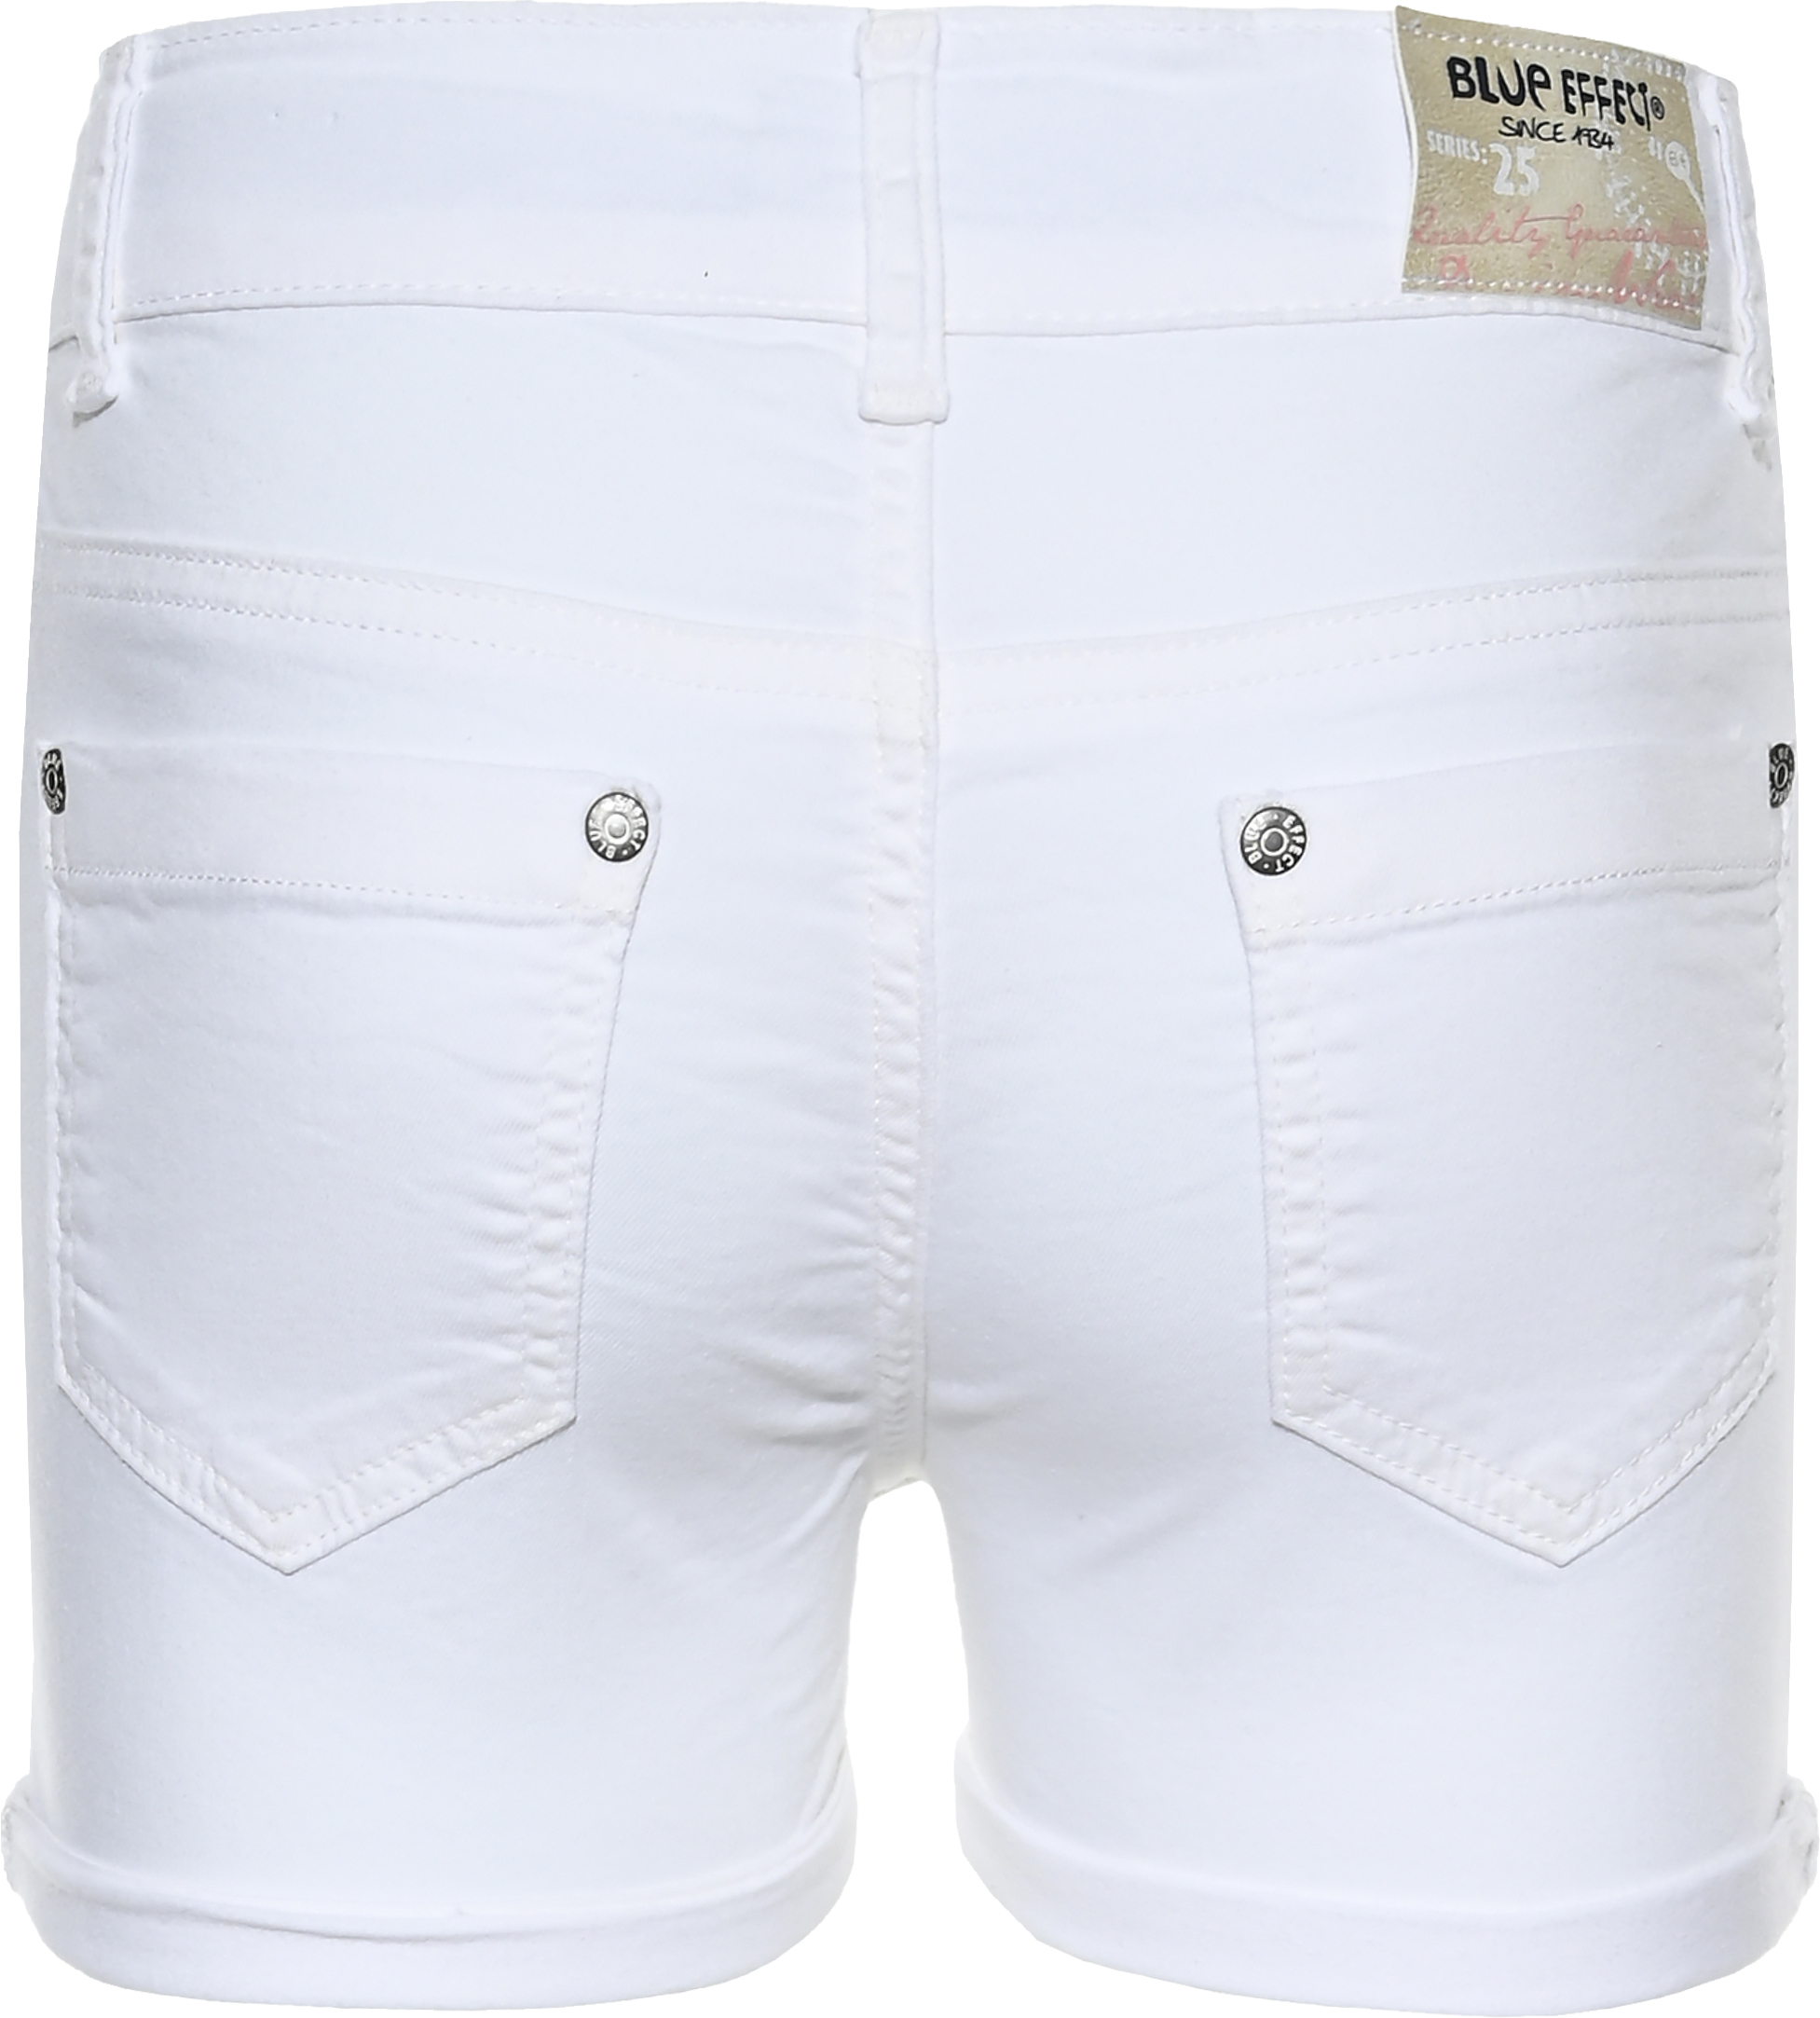 3192-Girls High-Waist Short available in Normal